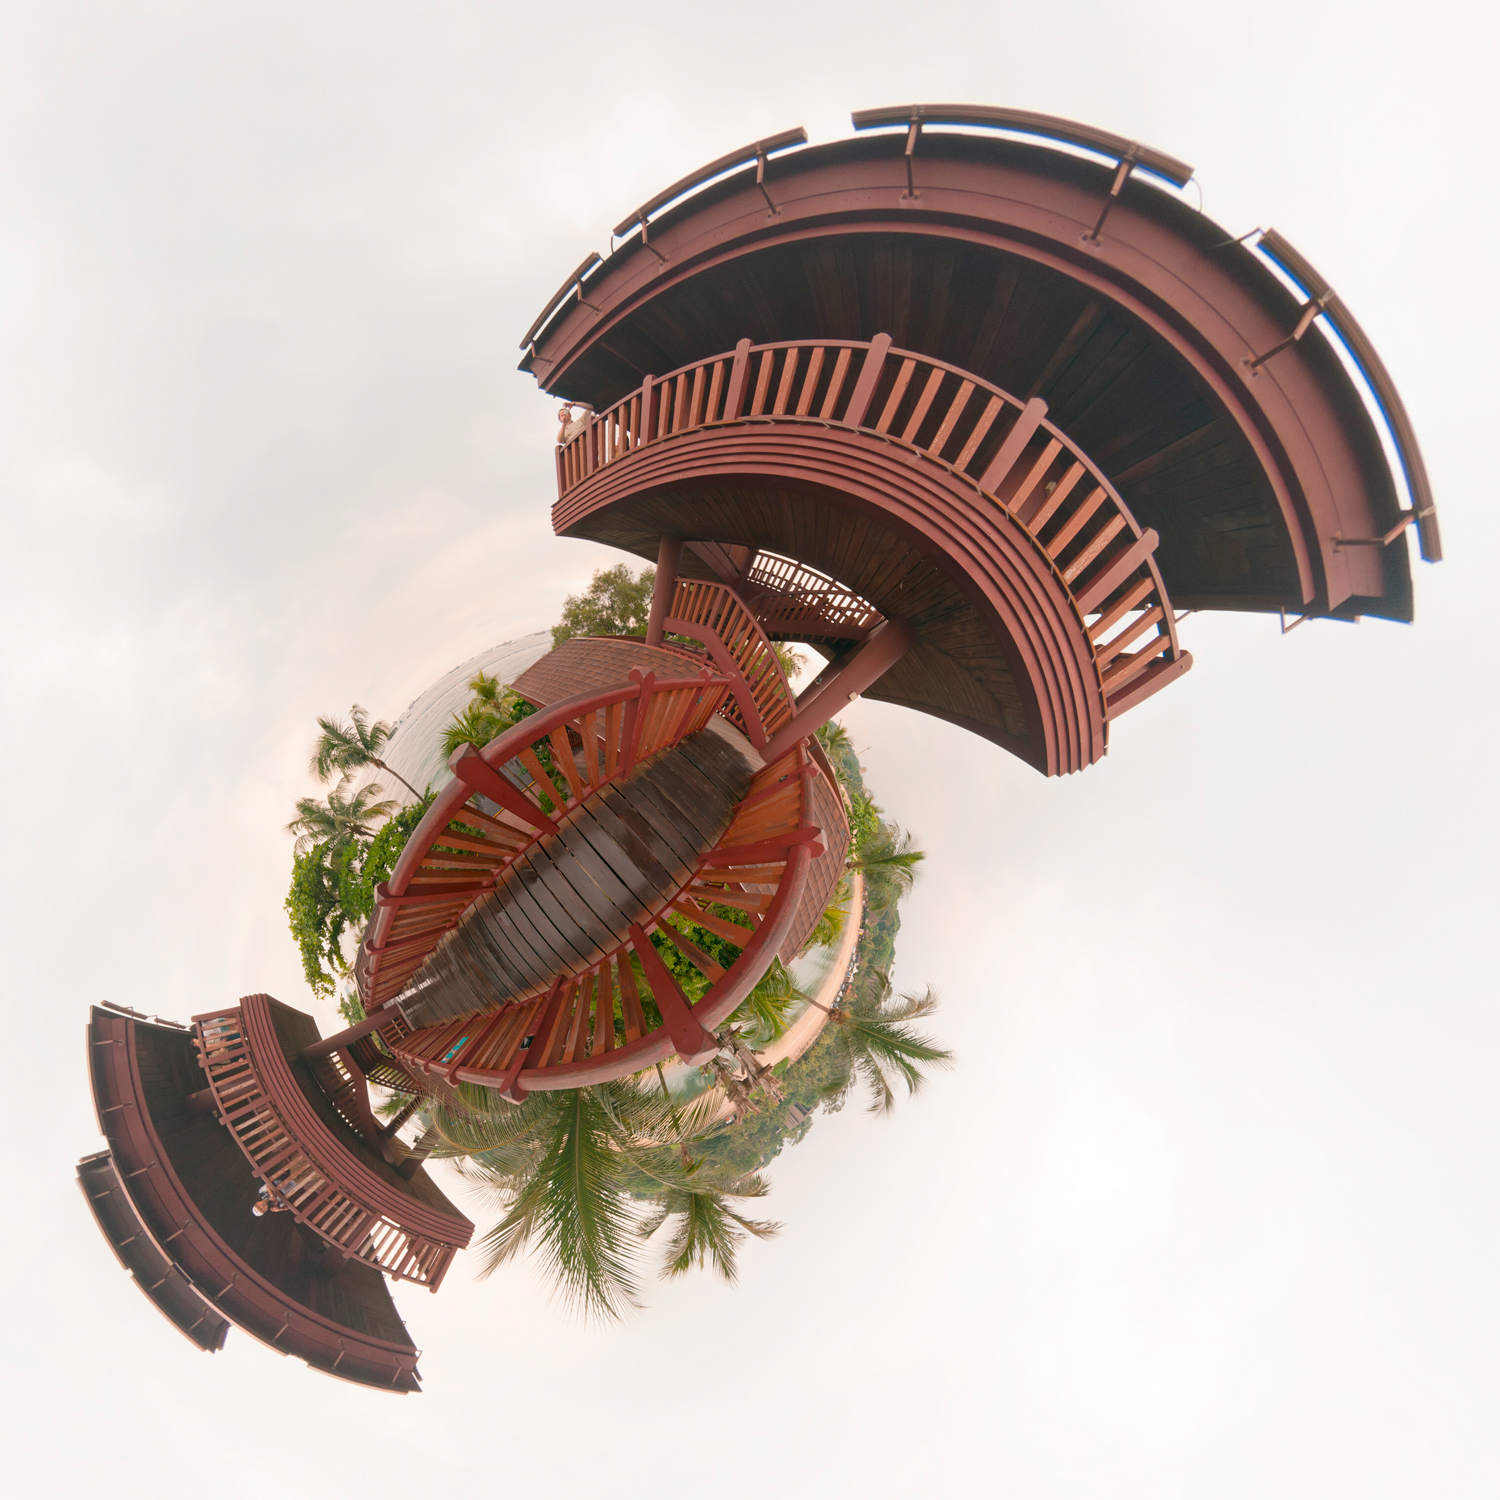 Panorama 141 - Little Planet